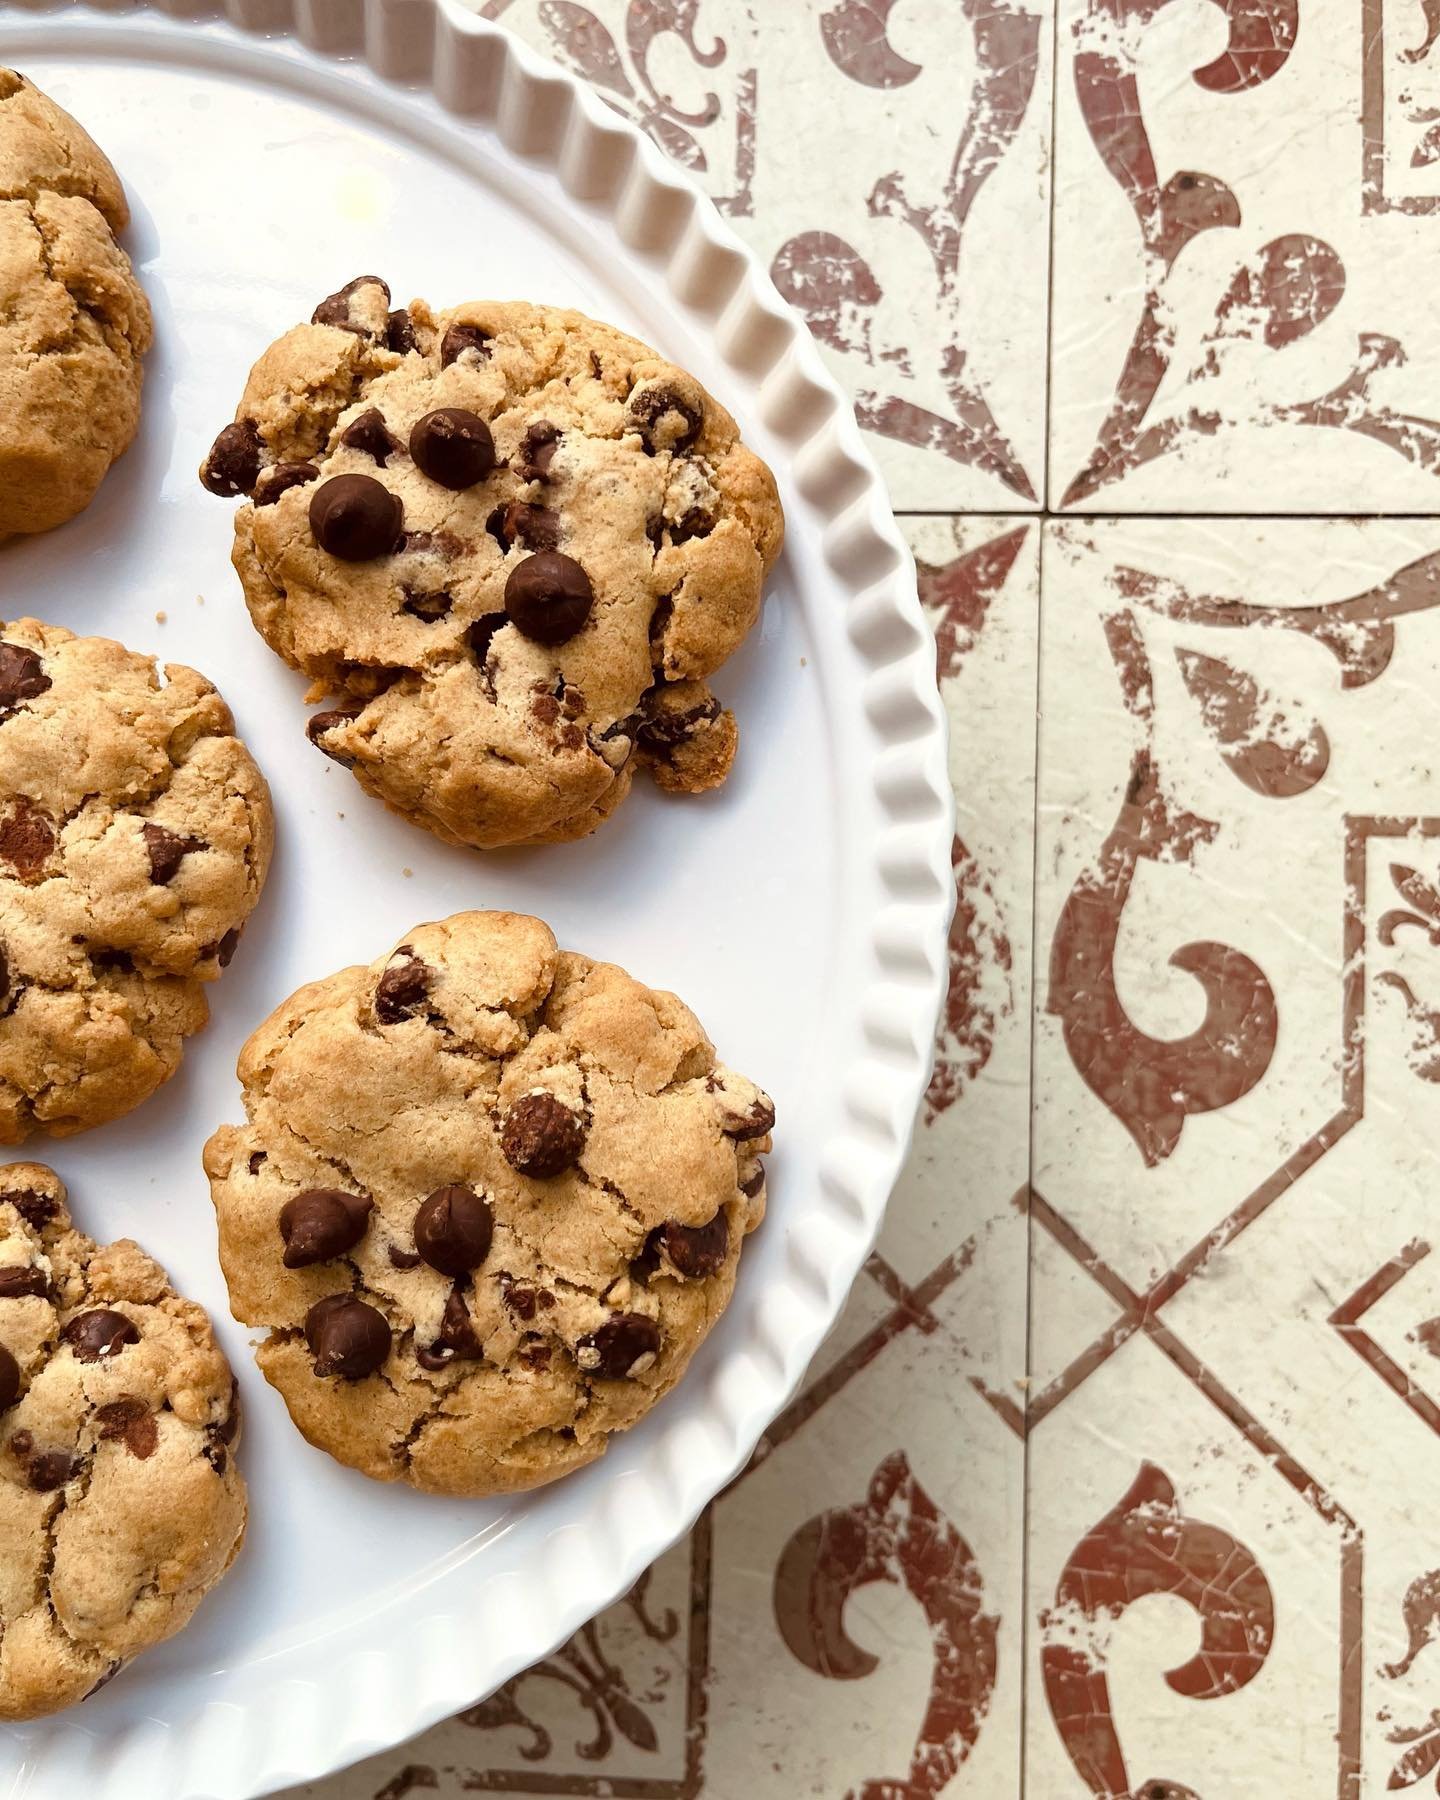 Indulge in the sweetest celebration! 🥳 Happy National Chocolate Chip Day! 🍪 Come celebrate with 2 for $5 on our chocolate chip cookies, plus irresistible chocolate chip banana bread and muffins! Grab a treat, or two, or three! 😋🍫